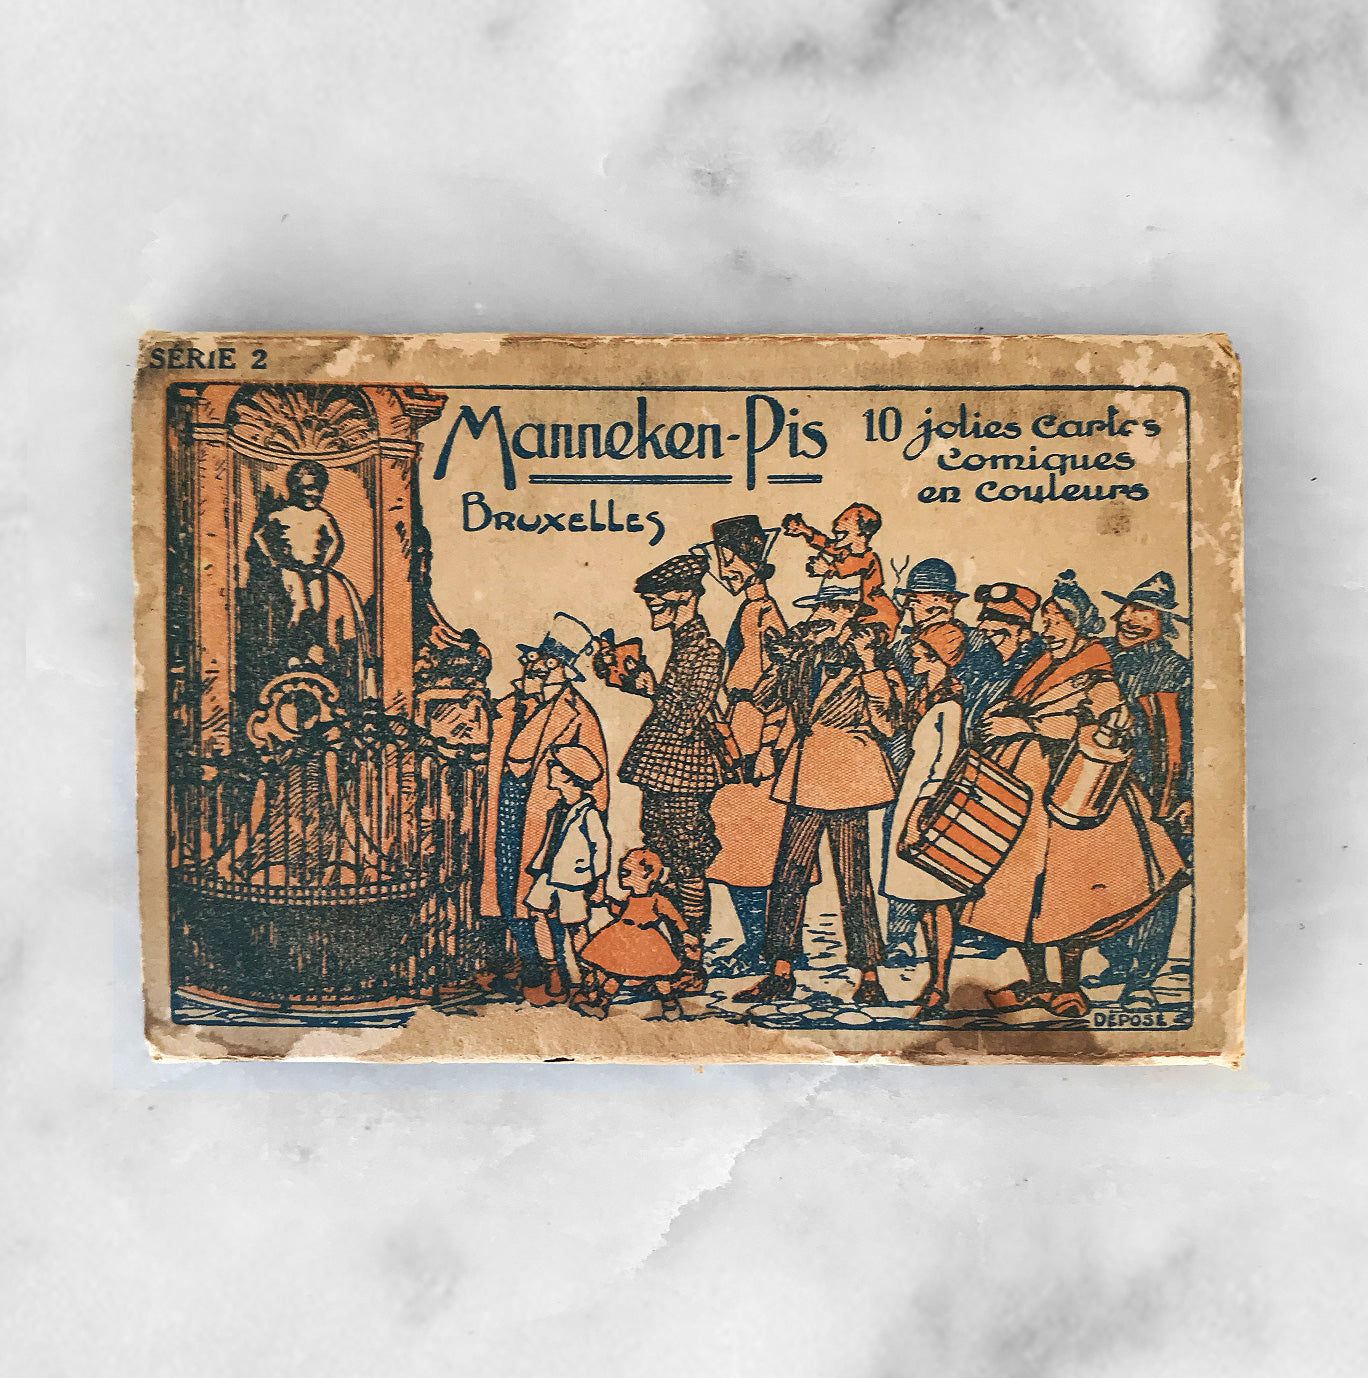 10 saucy vintage postcards from Belgium. All the stories are centred around the Mannekin Pis statue, a small boy taking a widdle! SHOP NOW - www.intovintage.co.uk